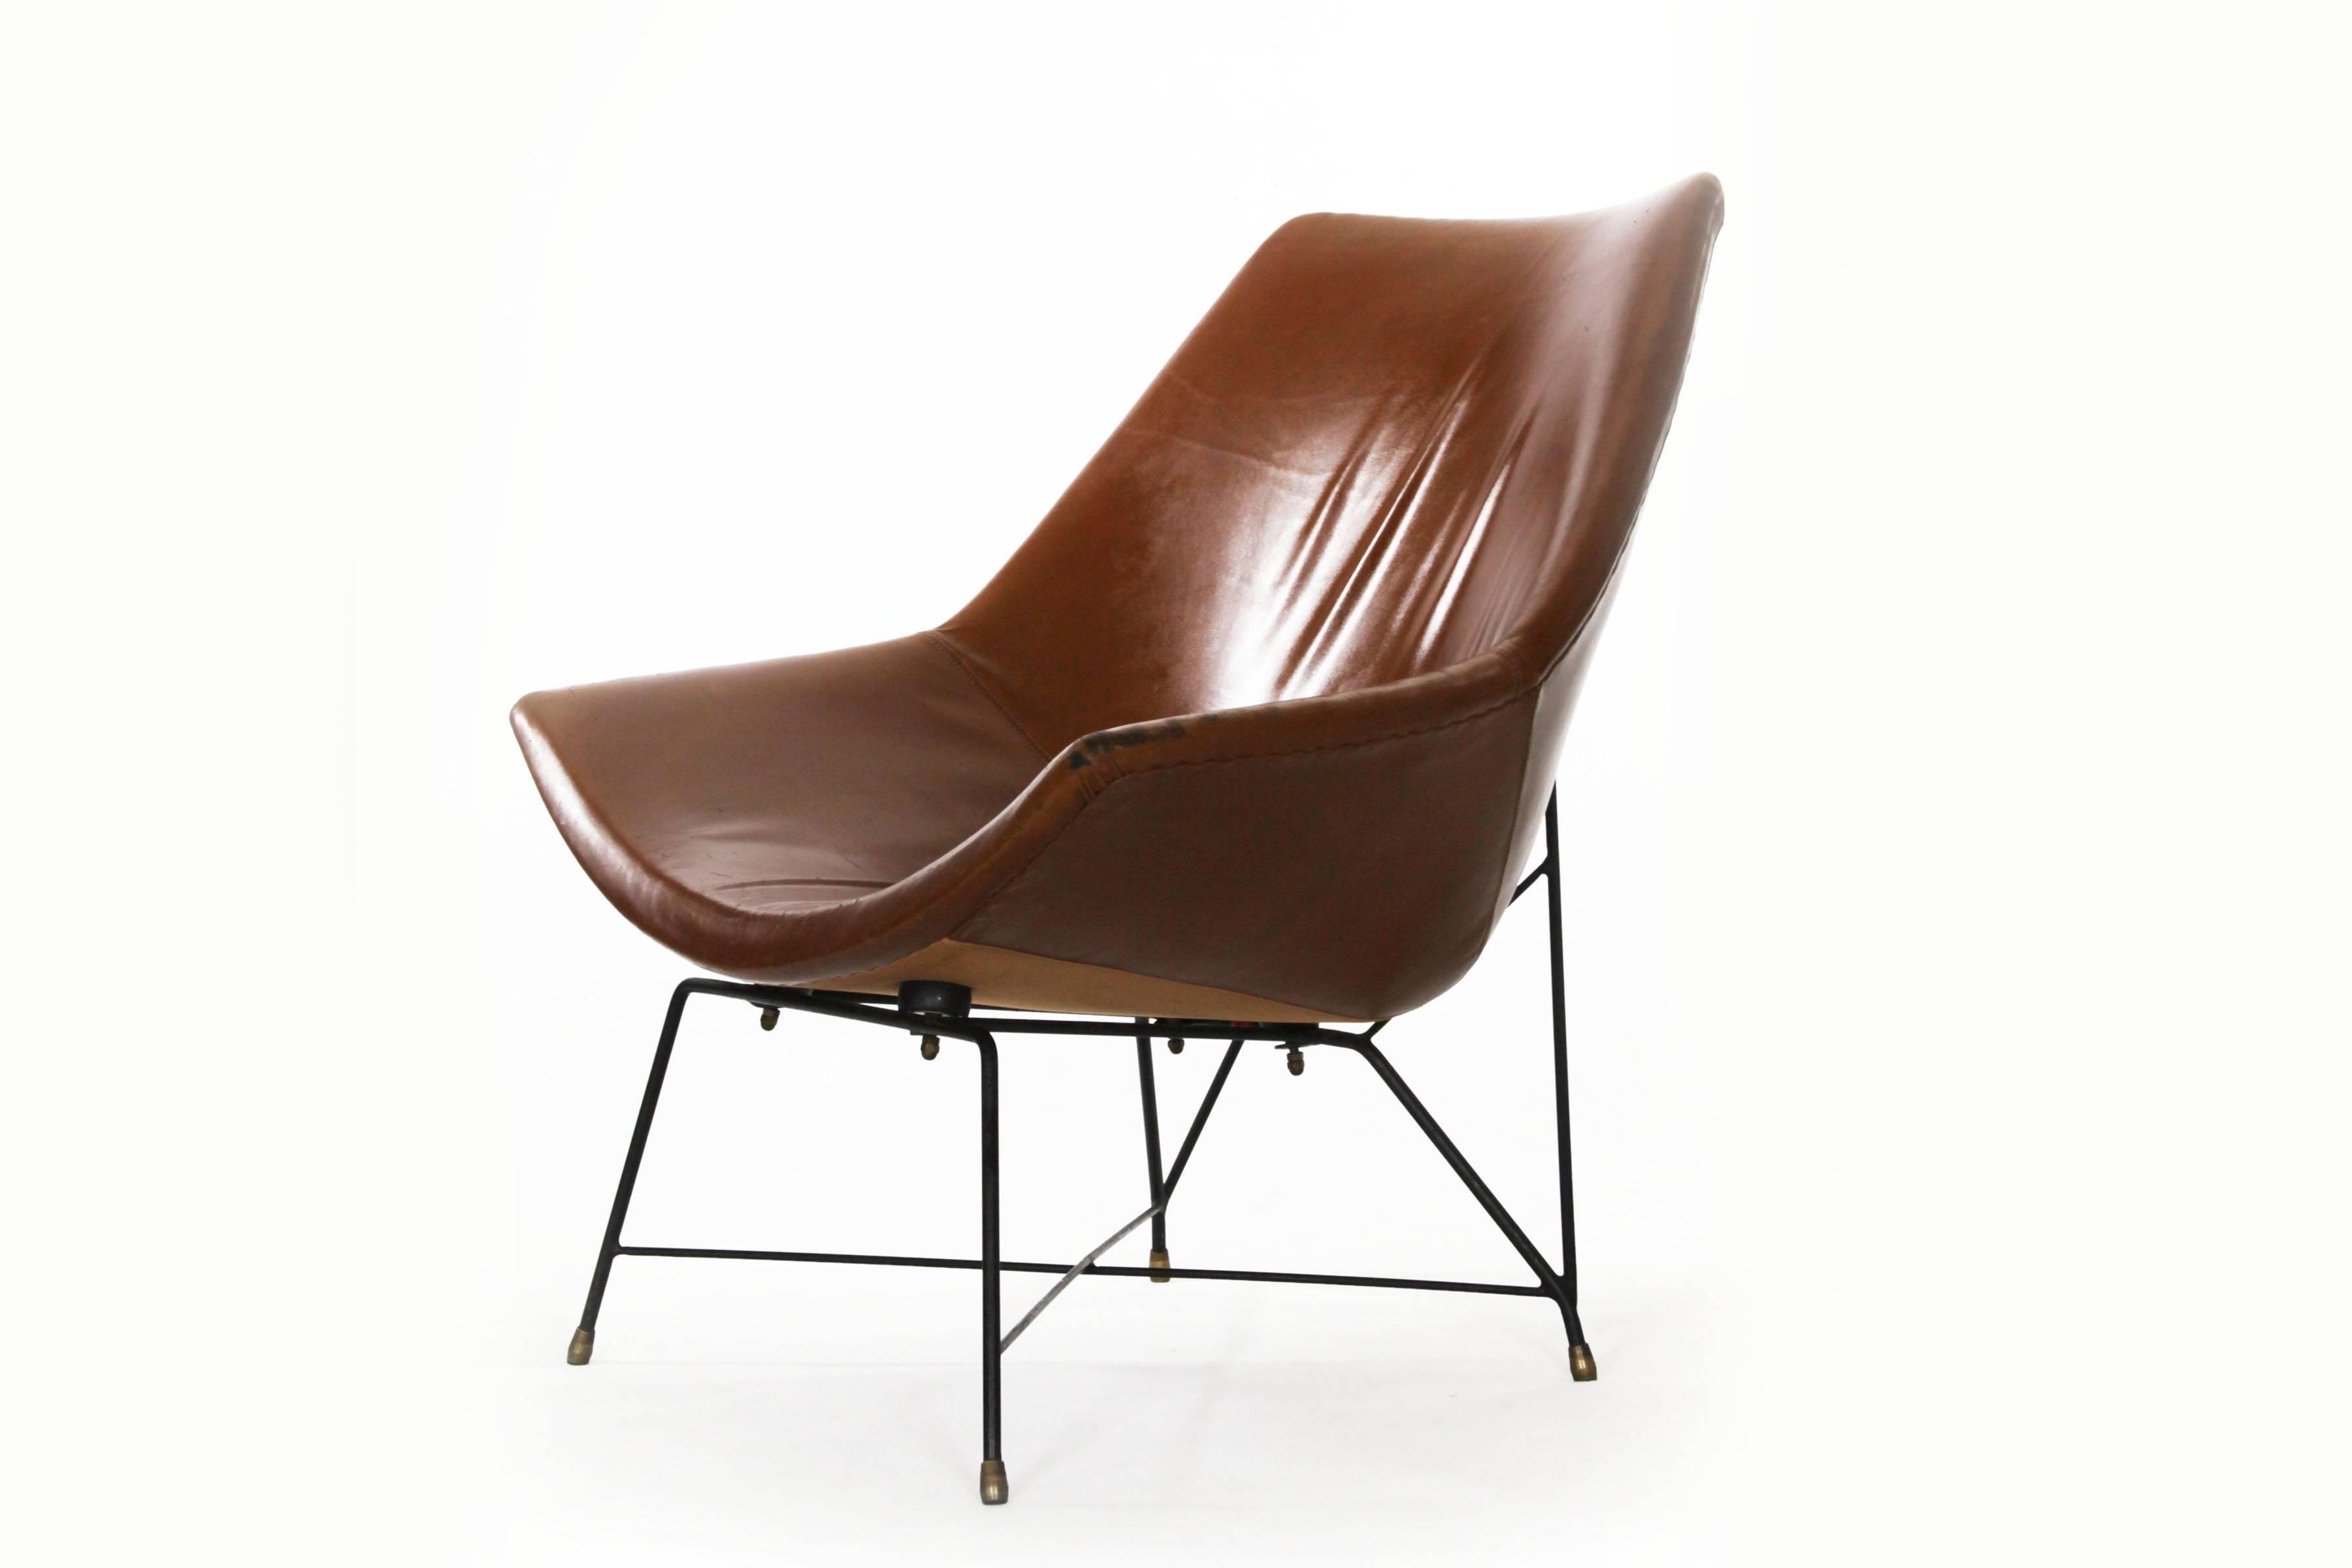 Brass Italian Brown Leather Kosmos Chair Design by Augusto Bozzi for Saporiti, 1954 For Sale